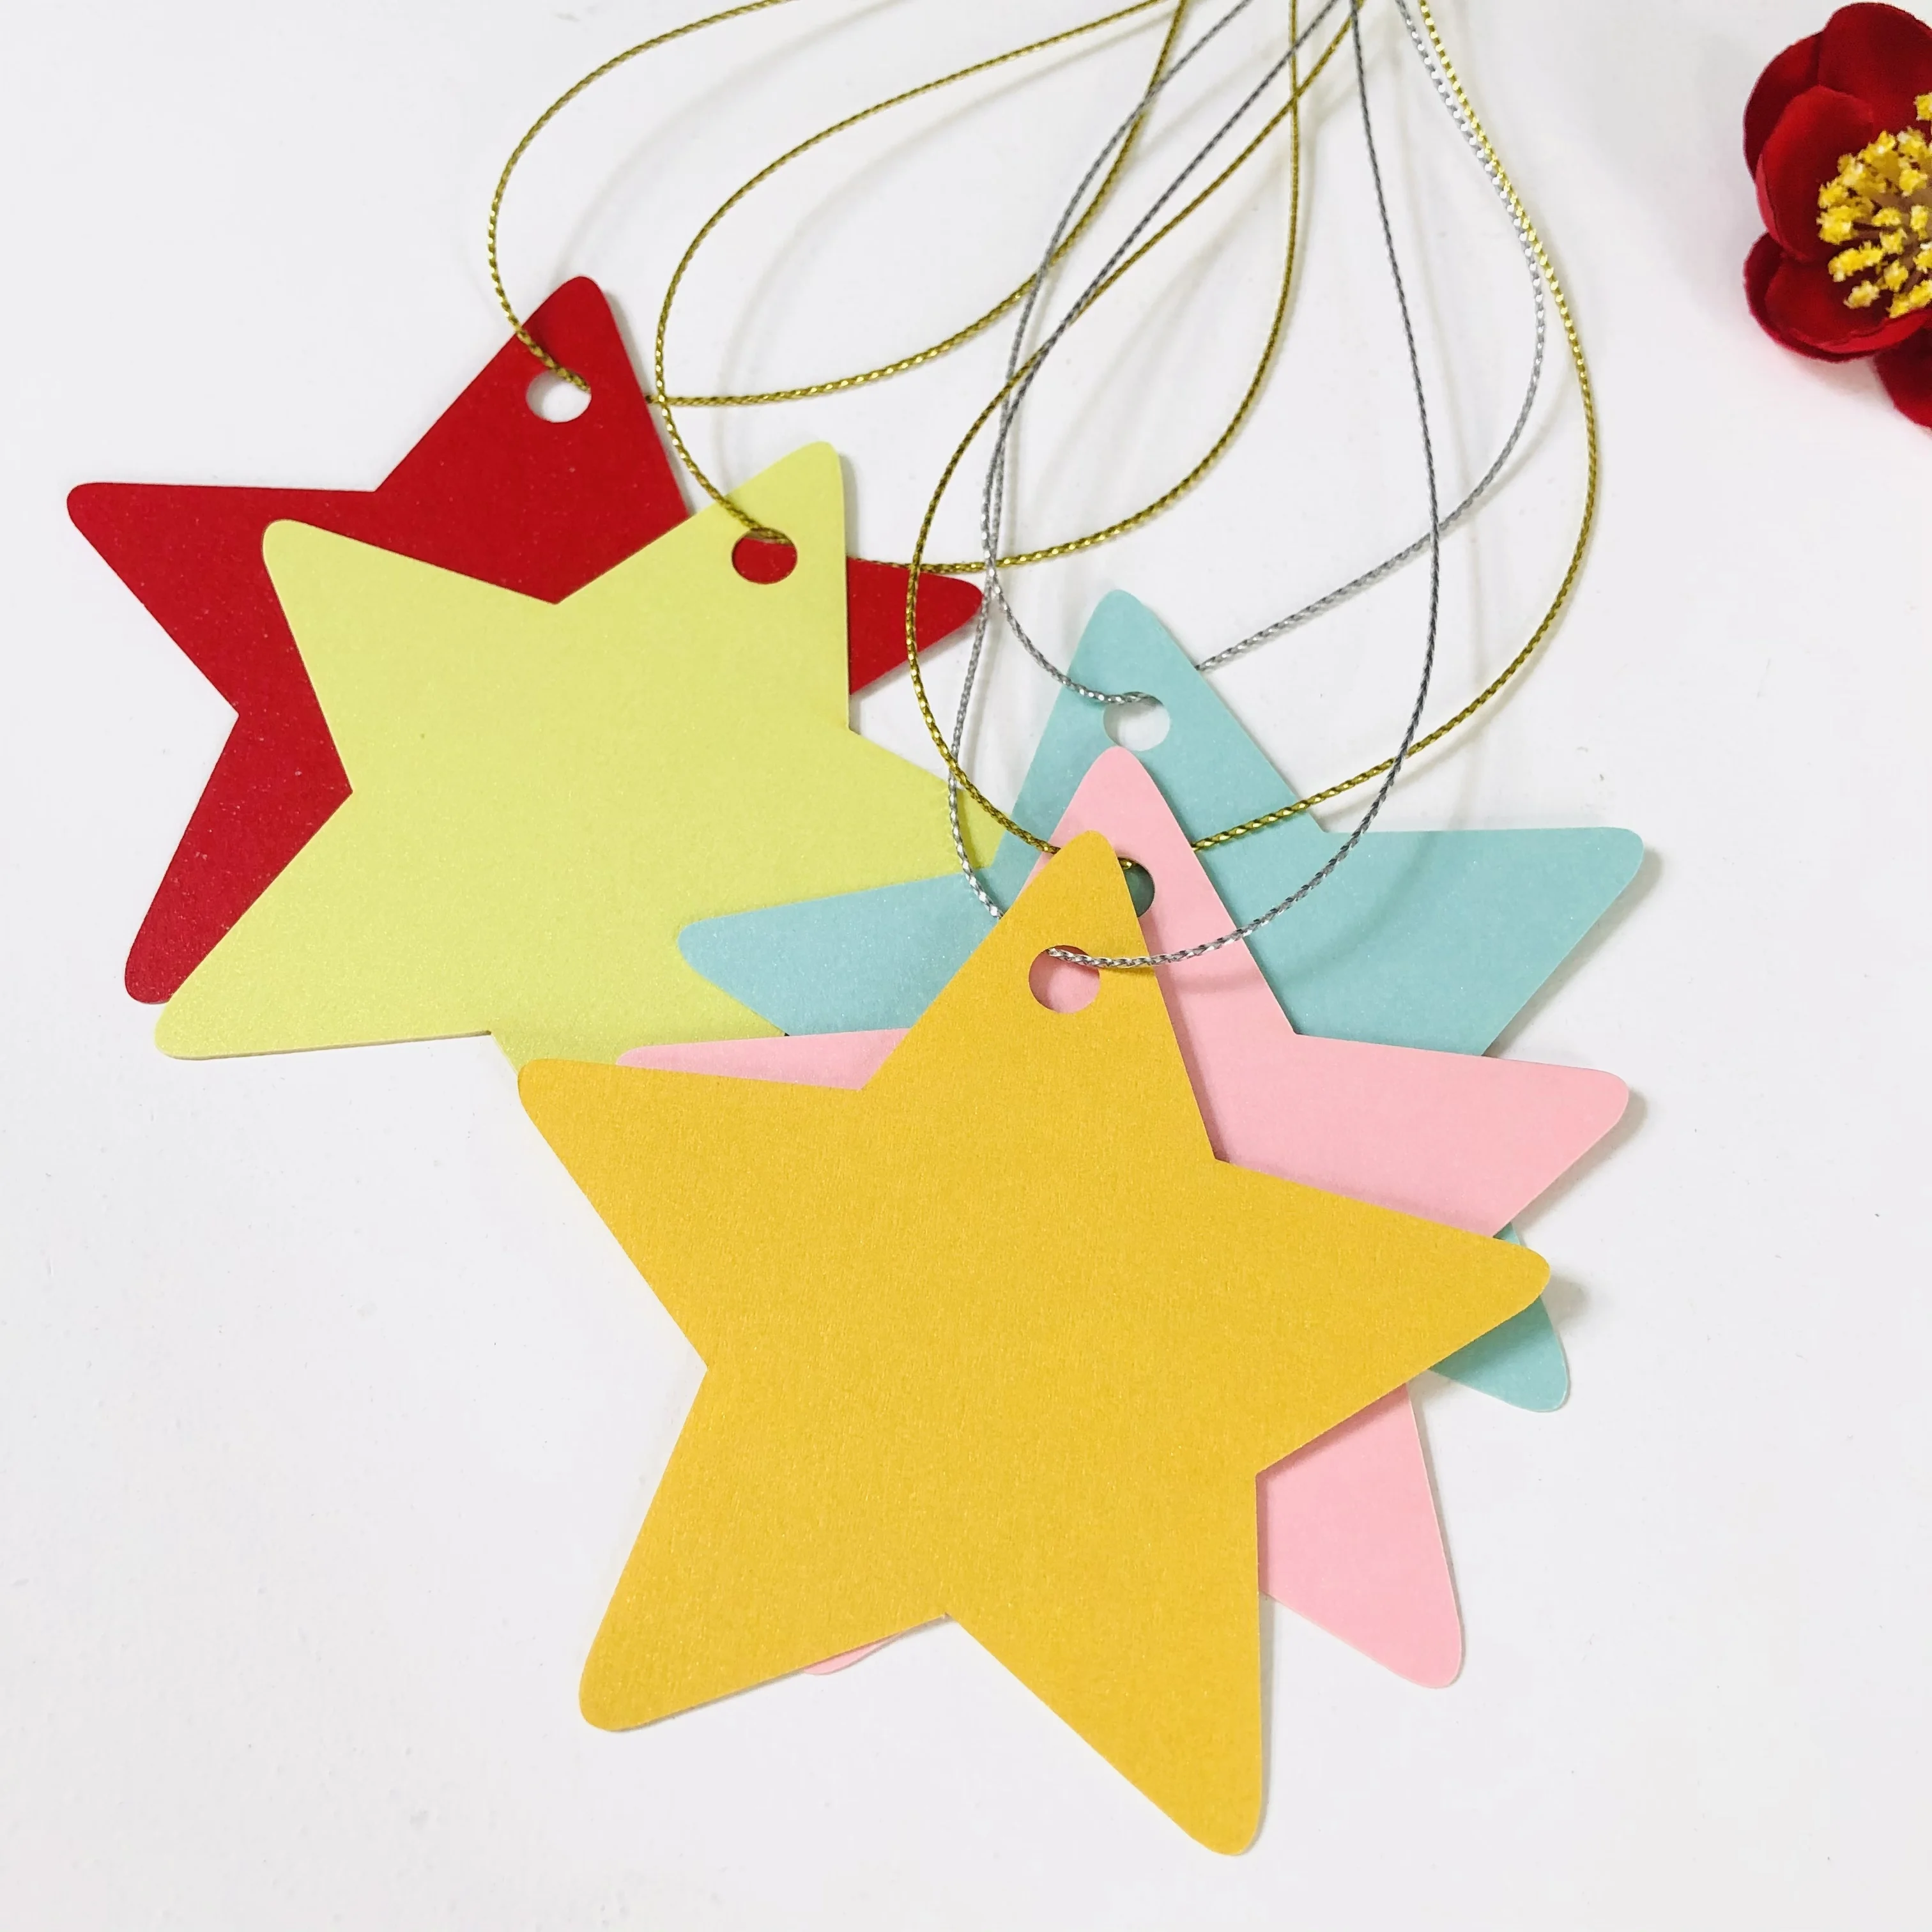 

50pcs Star Hanging Stickers Wish Cards For Home Decoration Mix-color DIY Crafts For Kids Rooms Birthday Party Wedding Decor